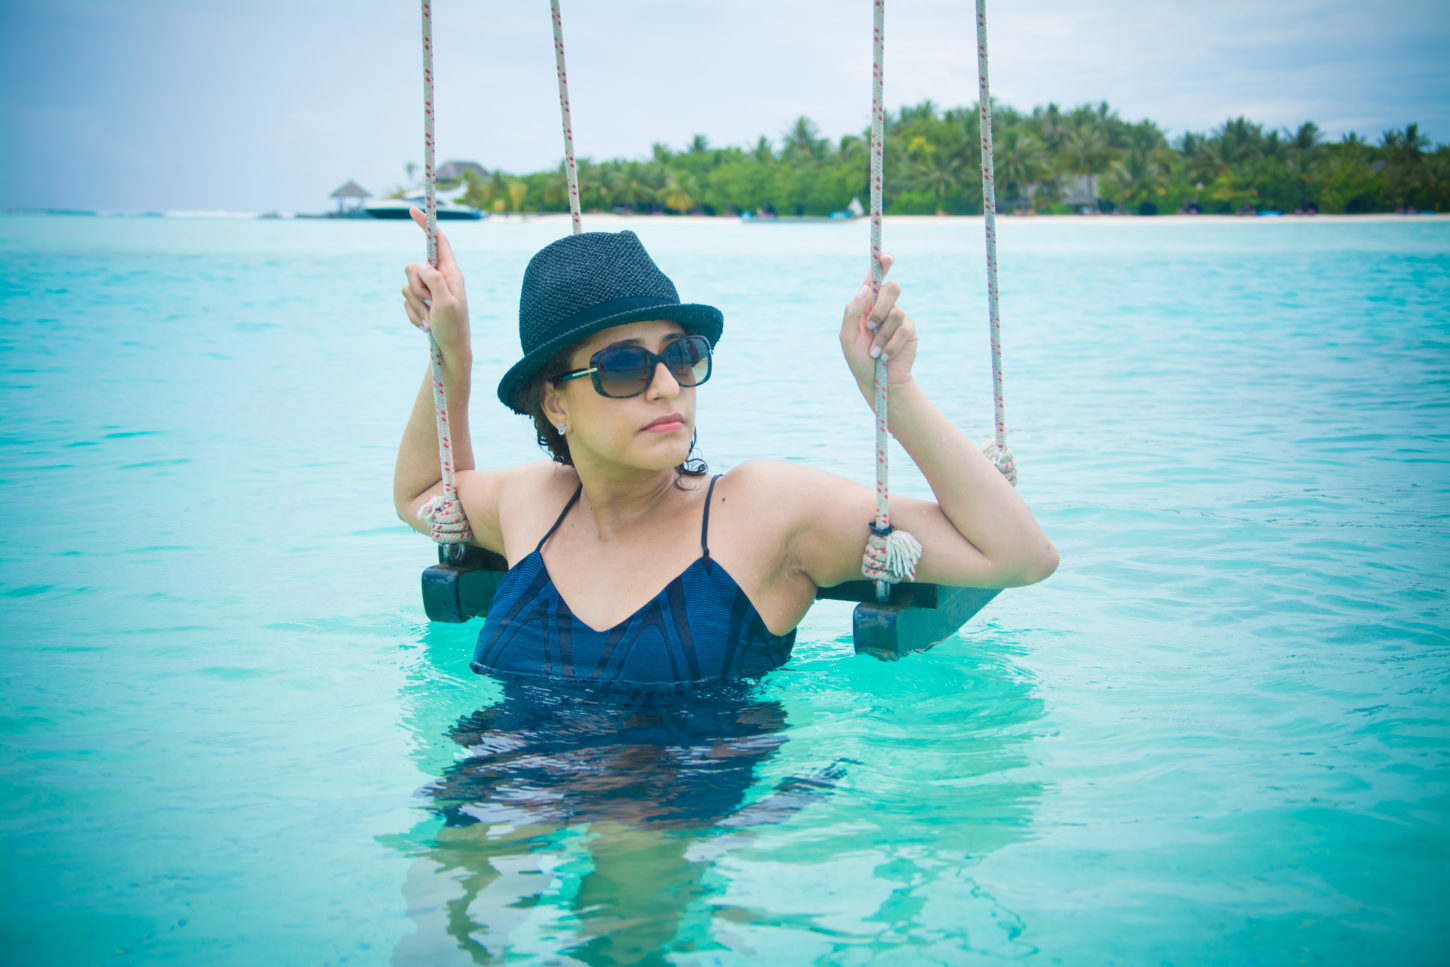 Swing your sorrows away in the clear Maldivian waters